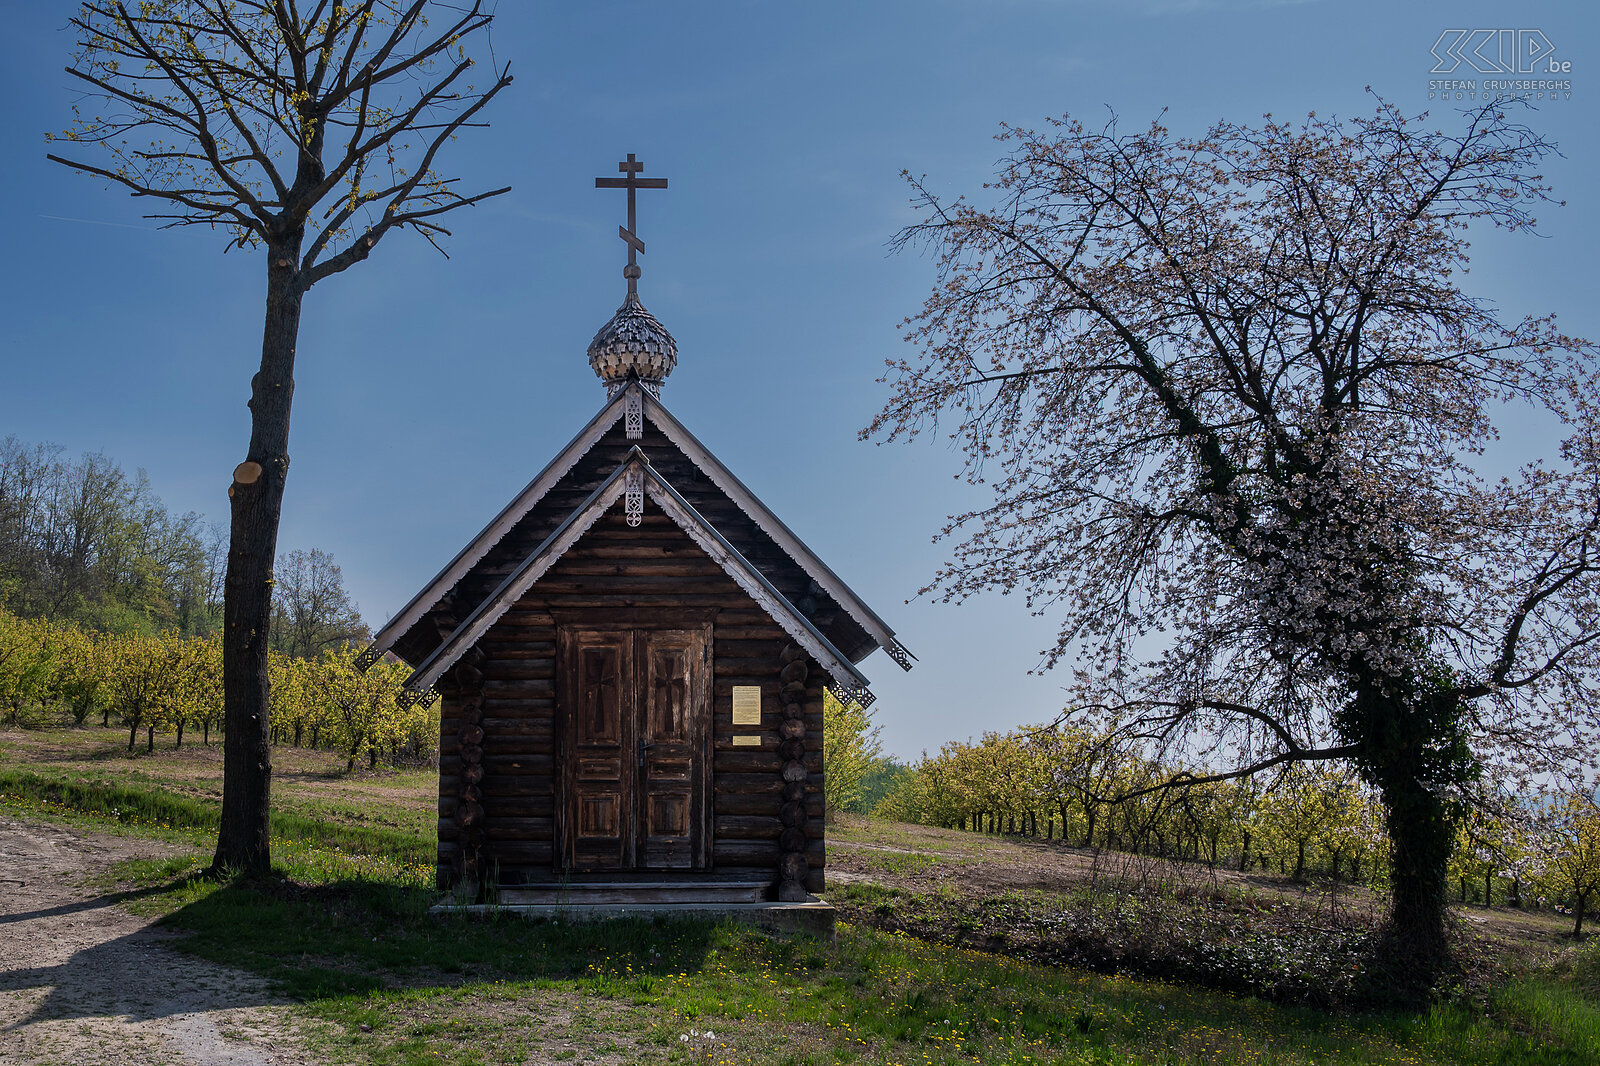 Magliano Alfieri - Cappella di Sant'Anastasia At the foot of the village of Magliano Alfieri is the Cappella di Sant'Anastasia, an Orthodox chapel built with wood that came from Russia especially for the chapel. Stefan Cruysberghs